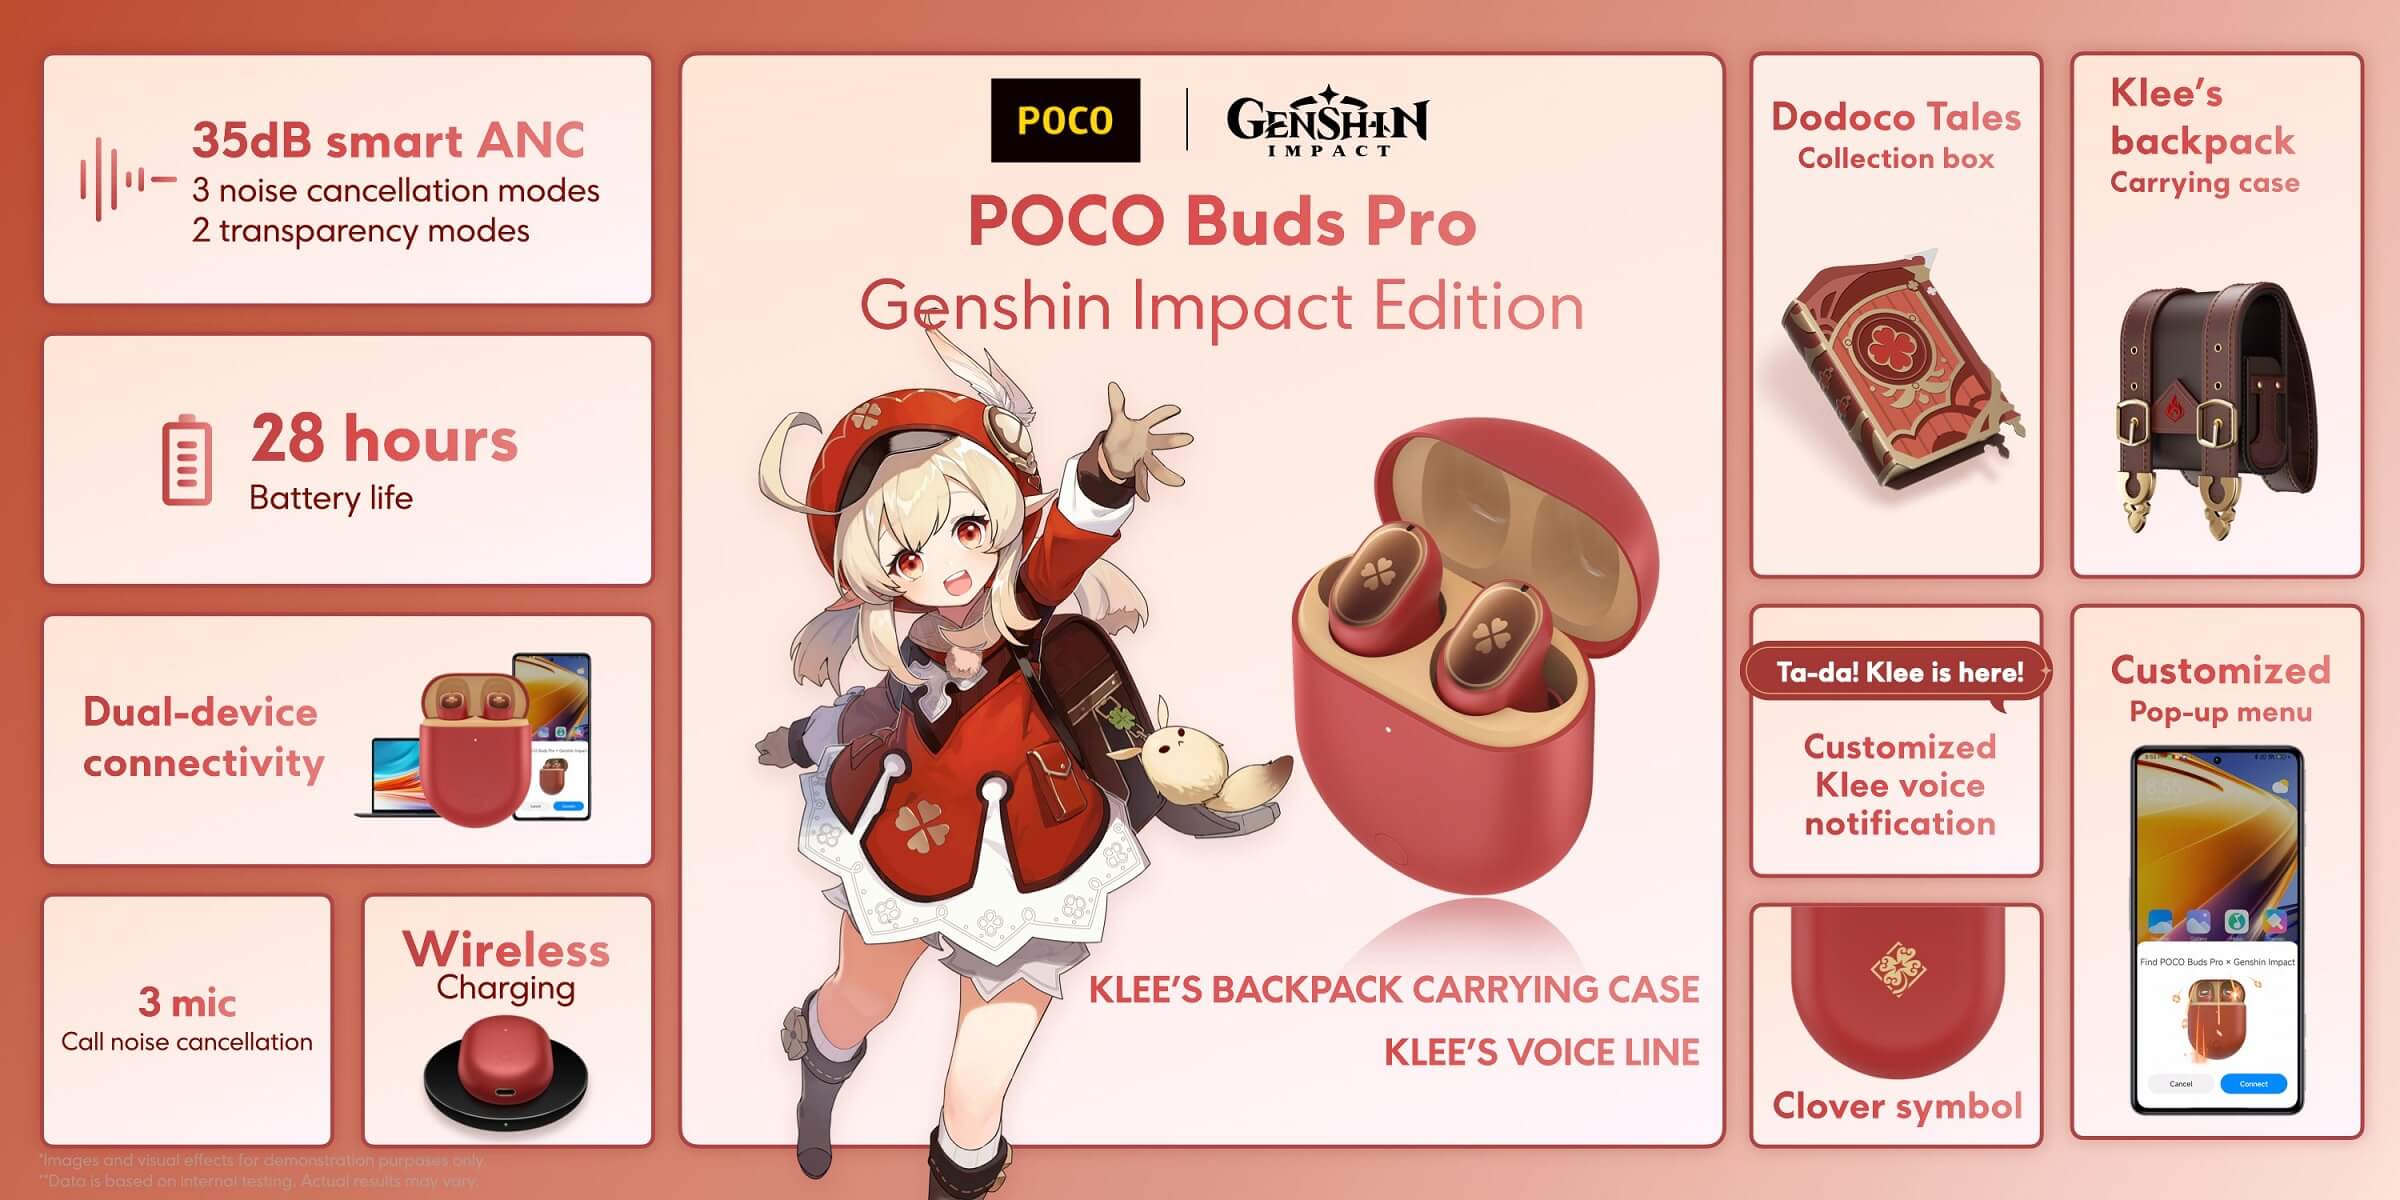 POCO Buds Pro Genshin impact Edition features